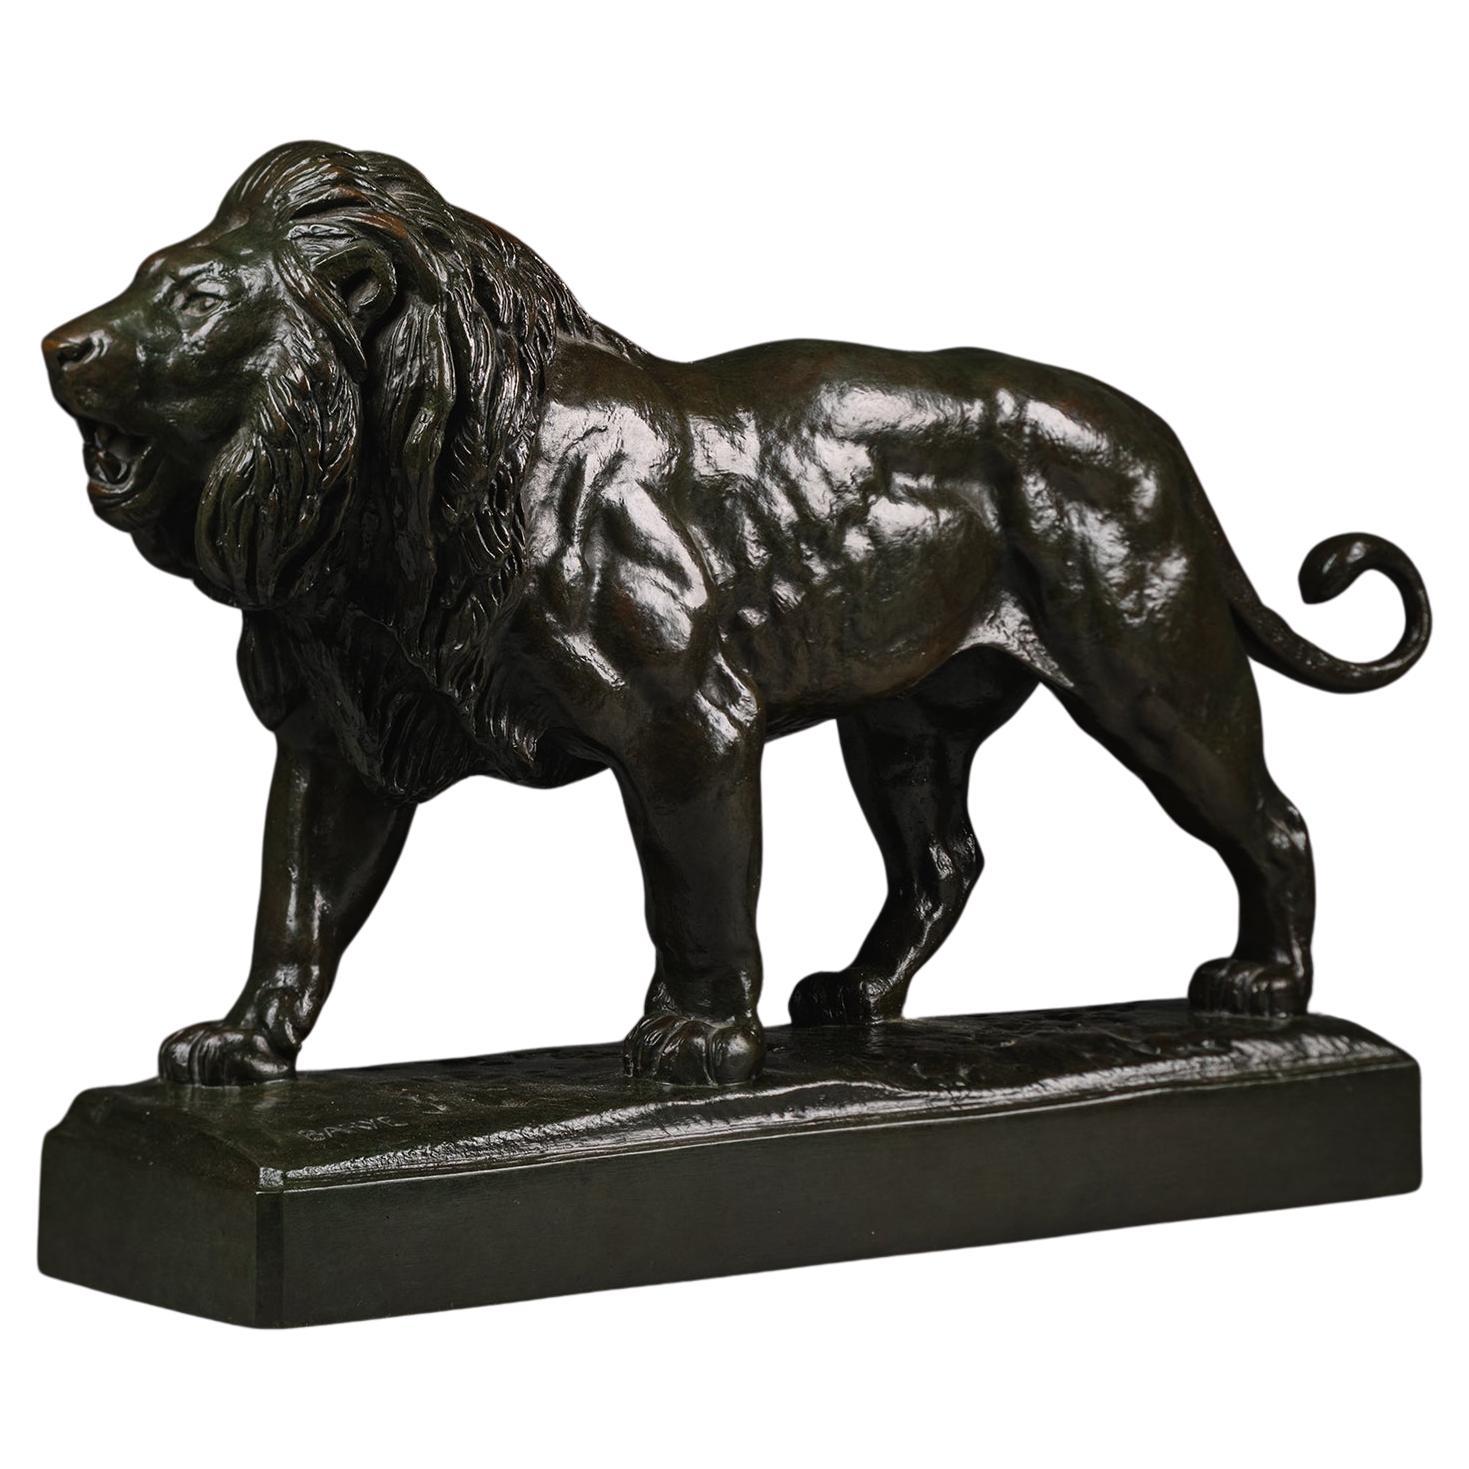 Antoine-Louis Barye (French, 1795-1875) 'Lion marchant'